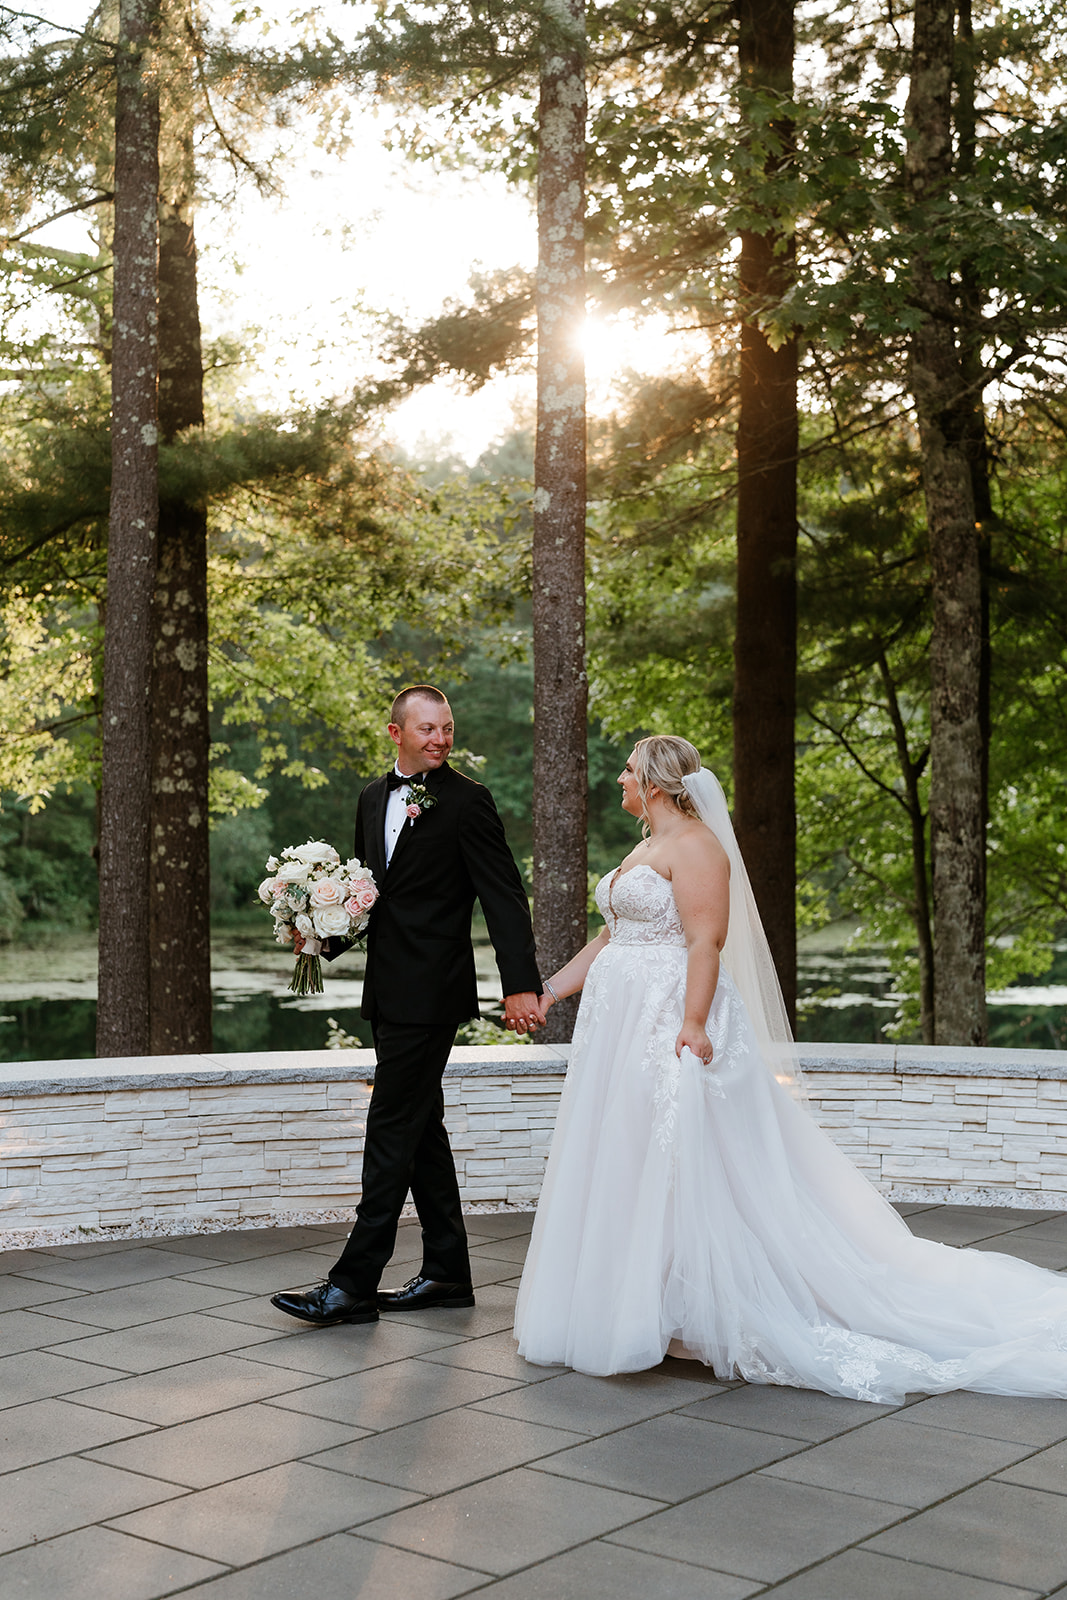 A couple dressed in wedding attire holding hands and looking at each other, with trees and a soft sunlight background.